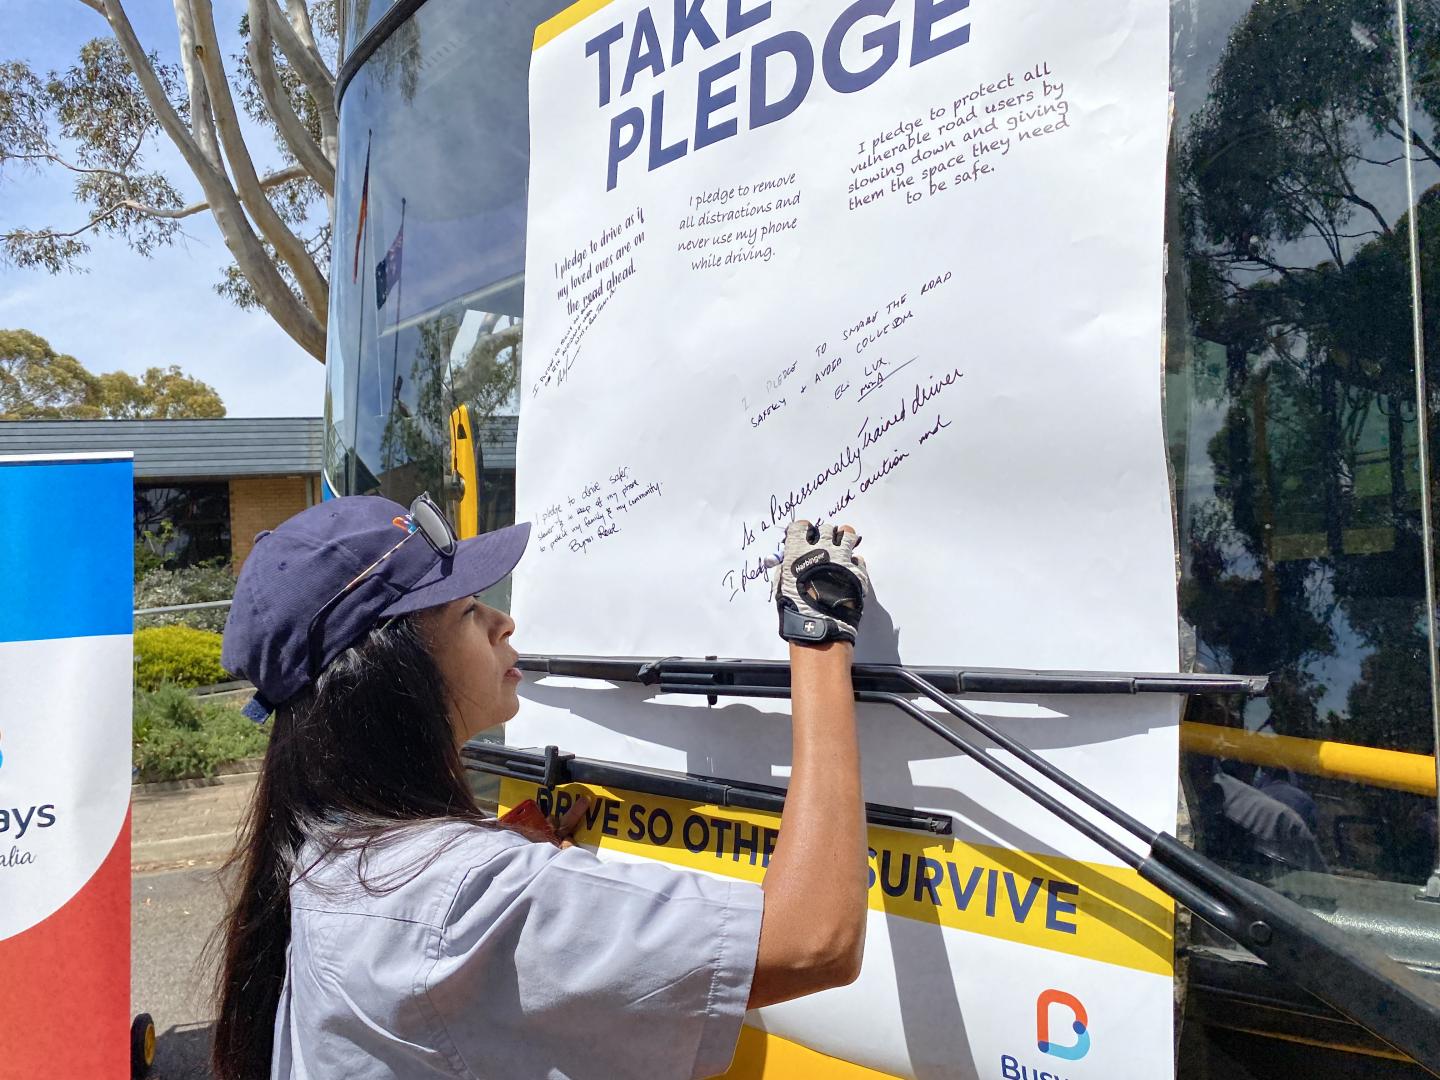 Busways employees have taken the Pledge to 'drive so others survive'